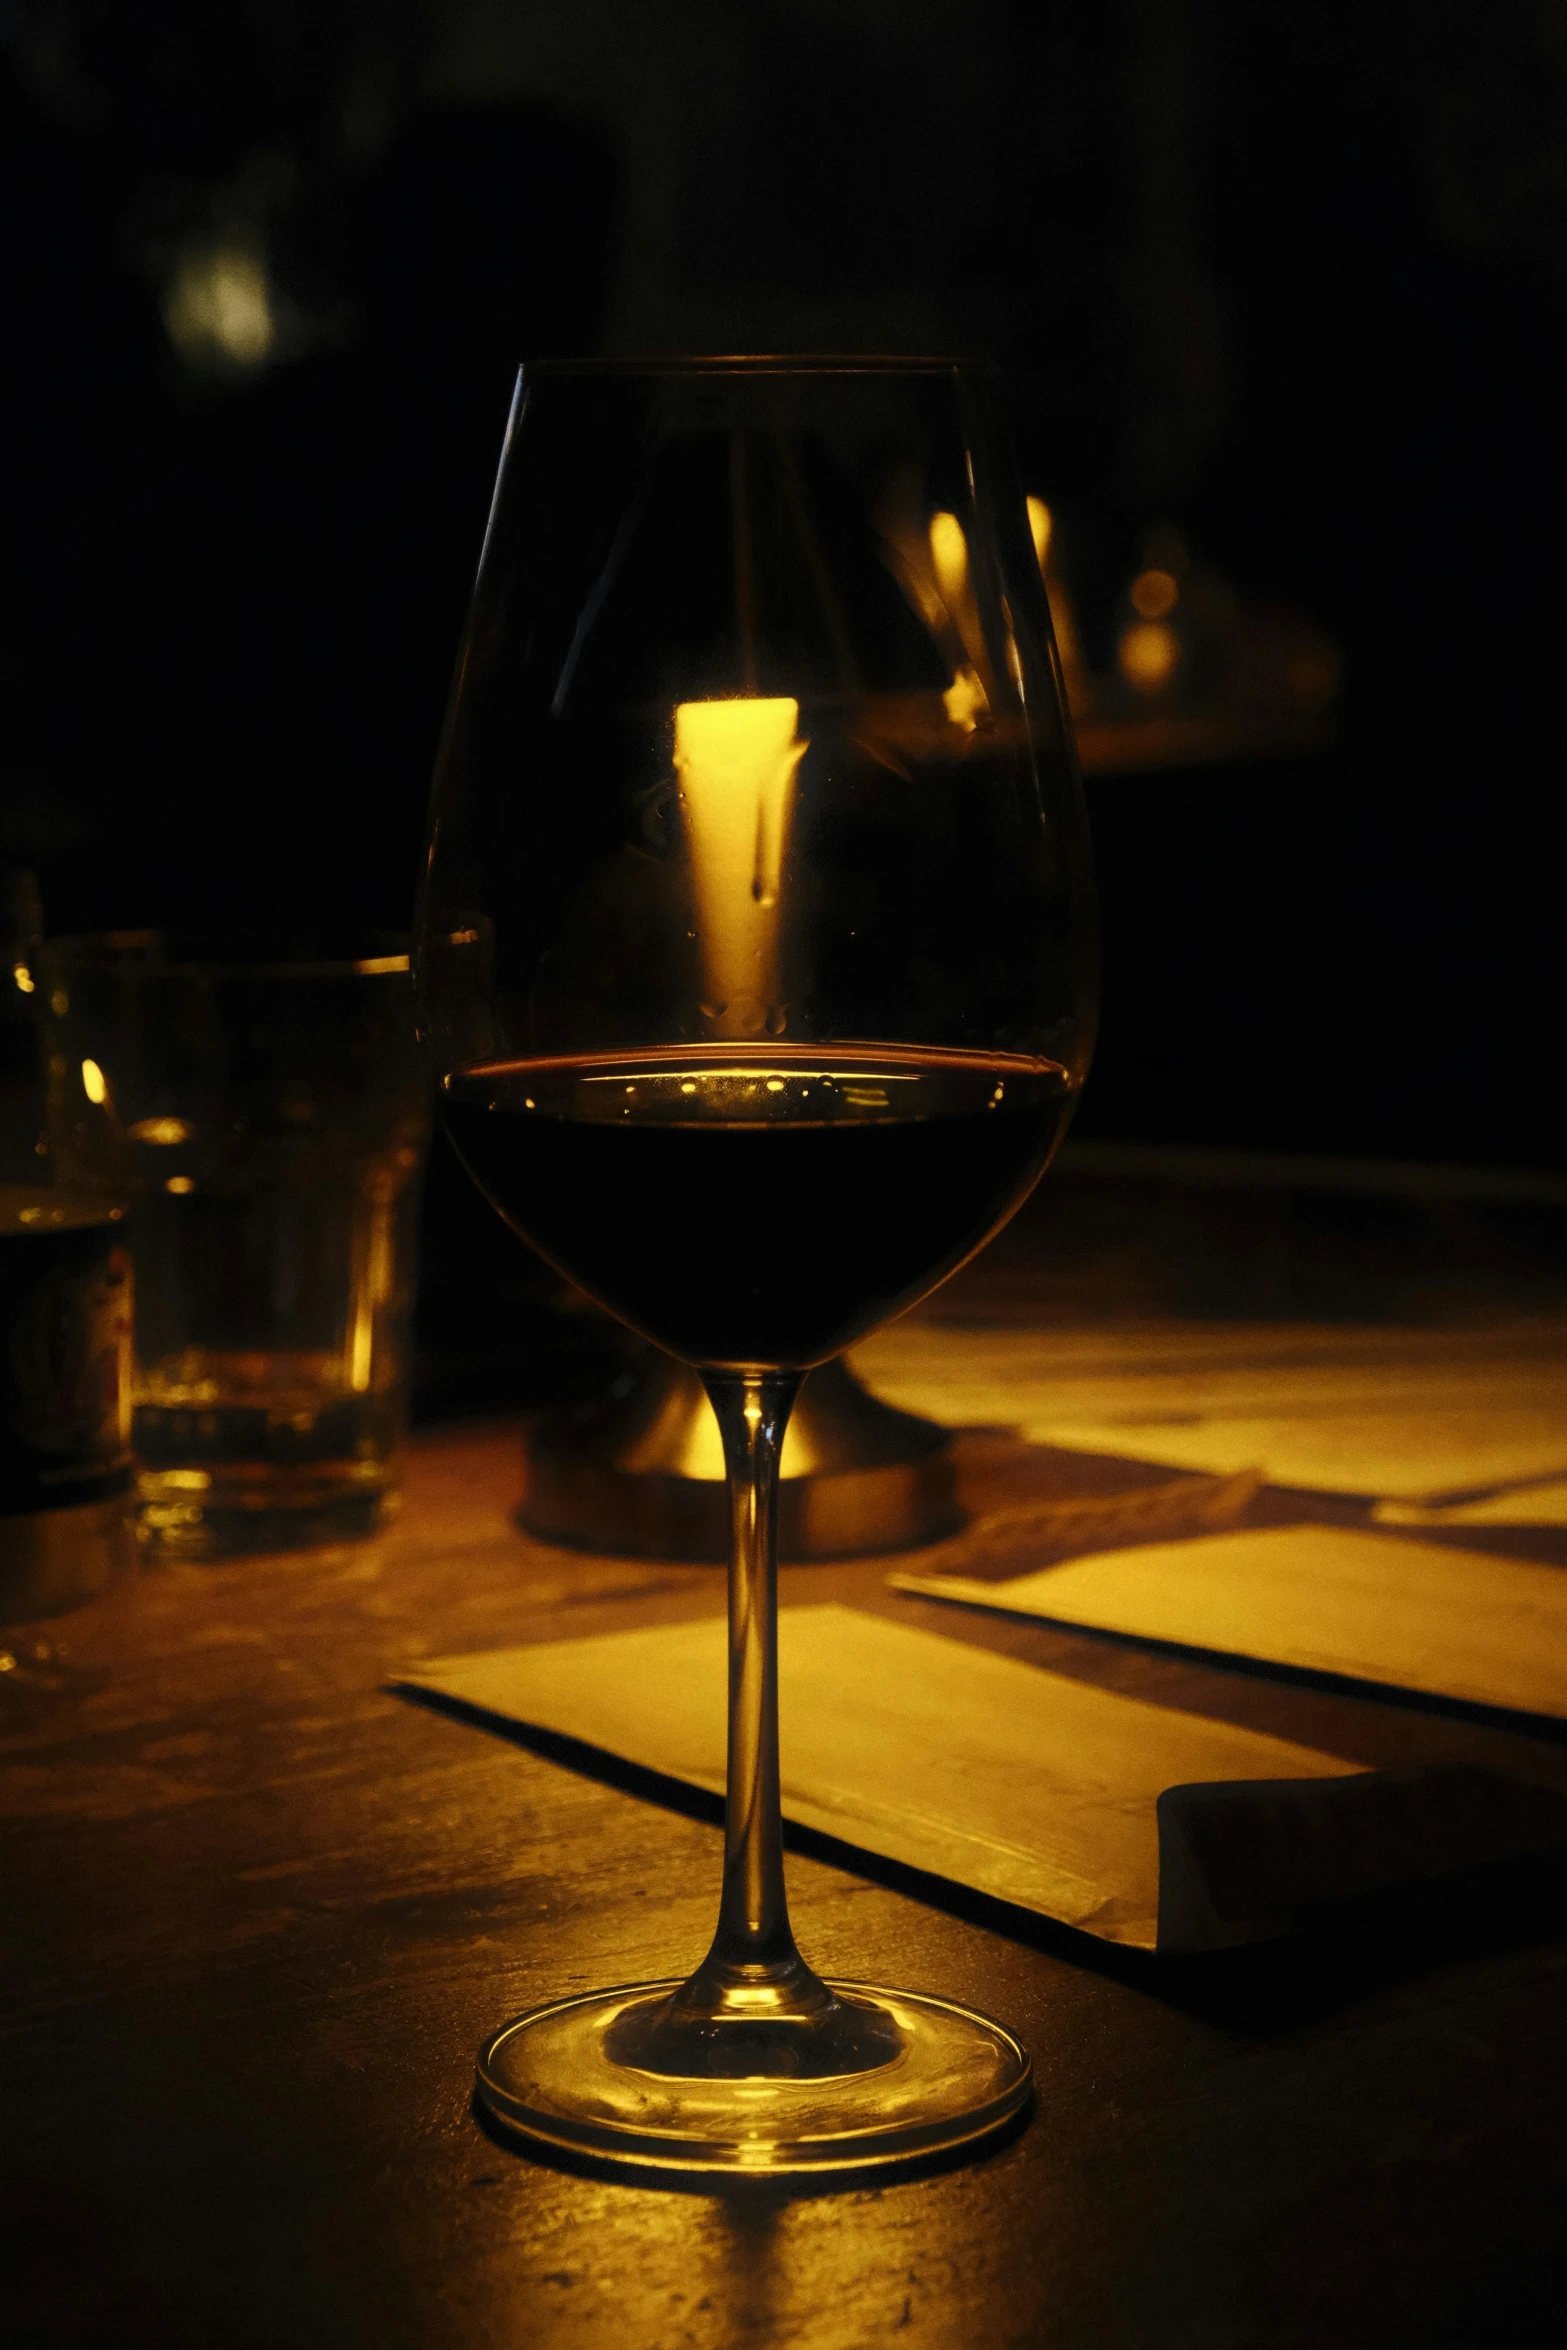 dark po of a glass of wine on a table